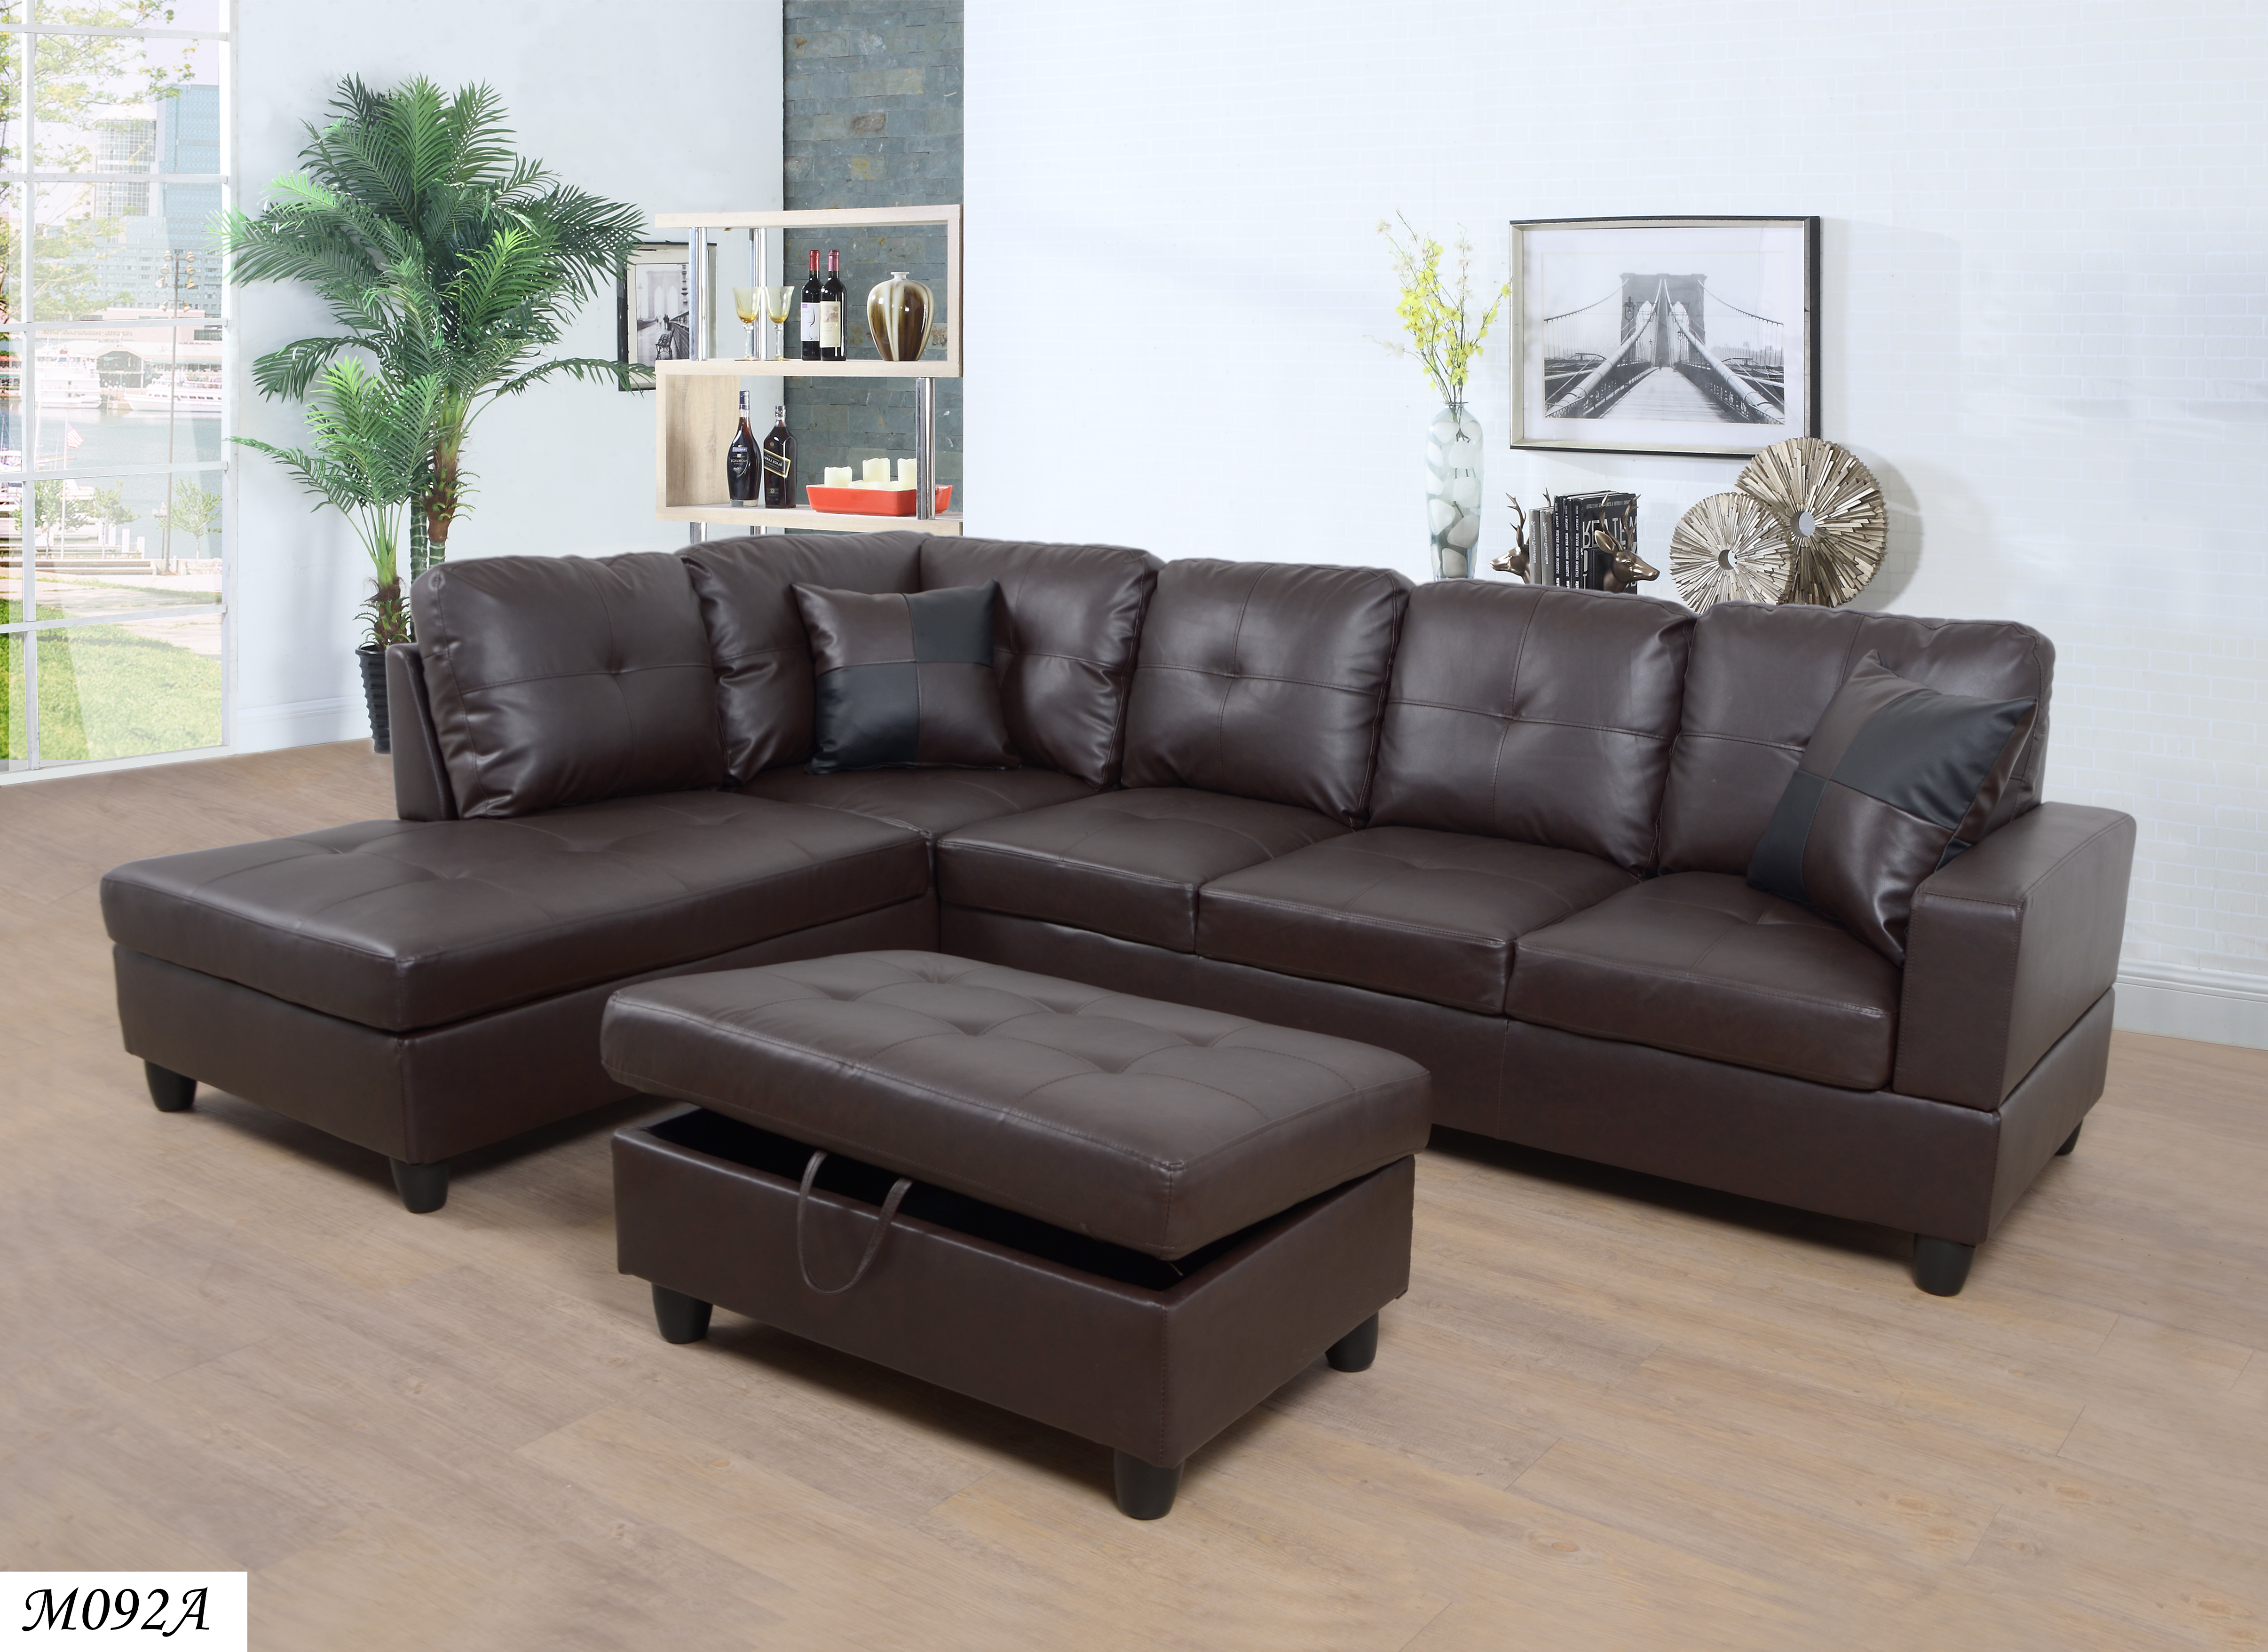 3 PC Sectional Sofa Set, (Brown) Faux Leather Left -Facing Chaise with Free Storage Ottoman-CASAINC